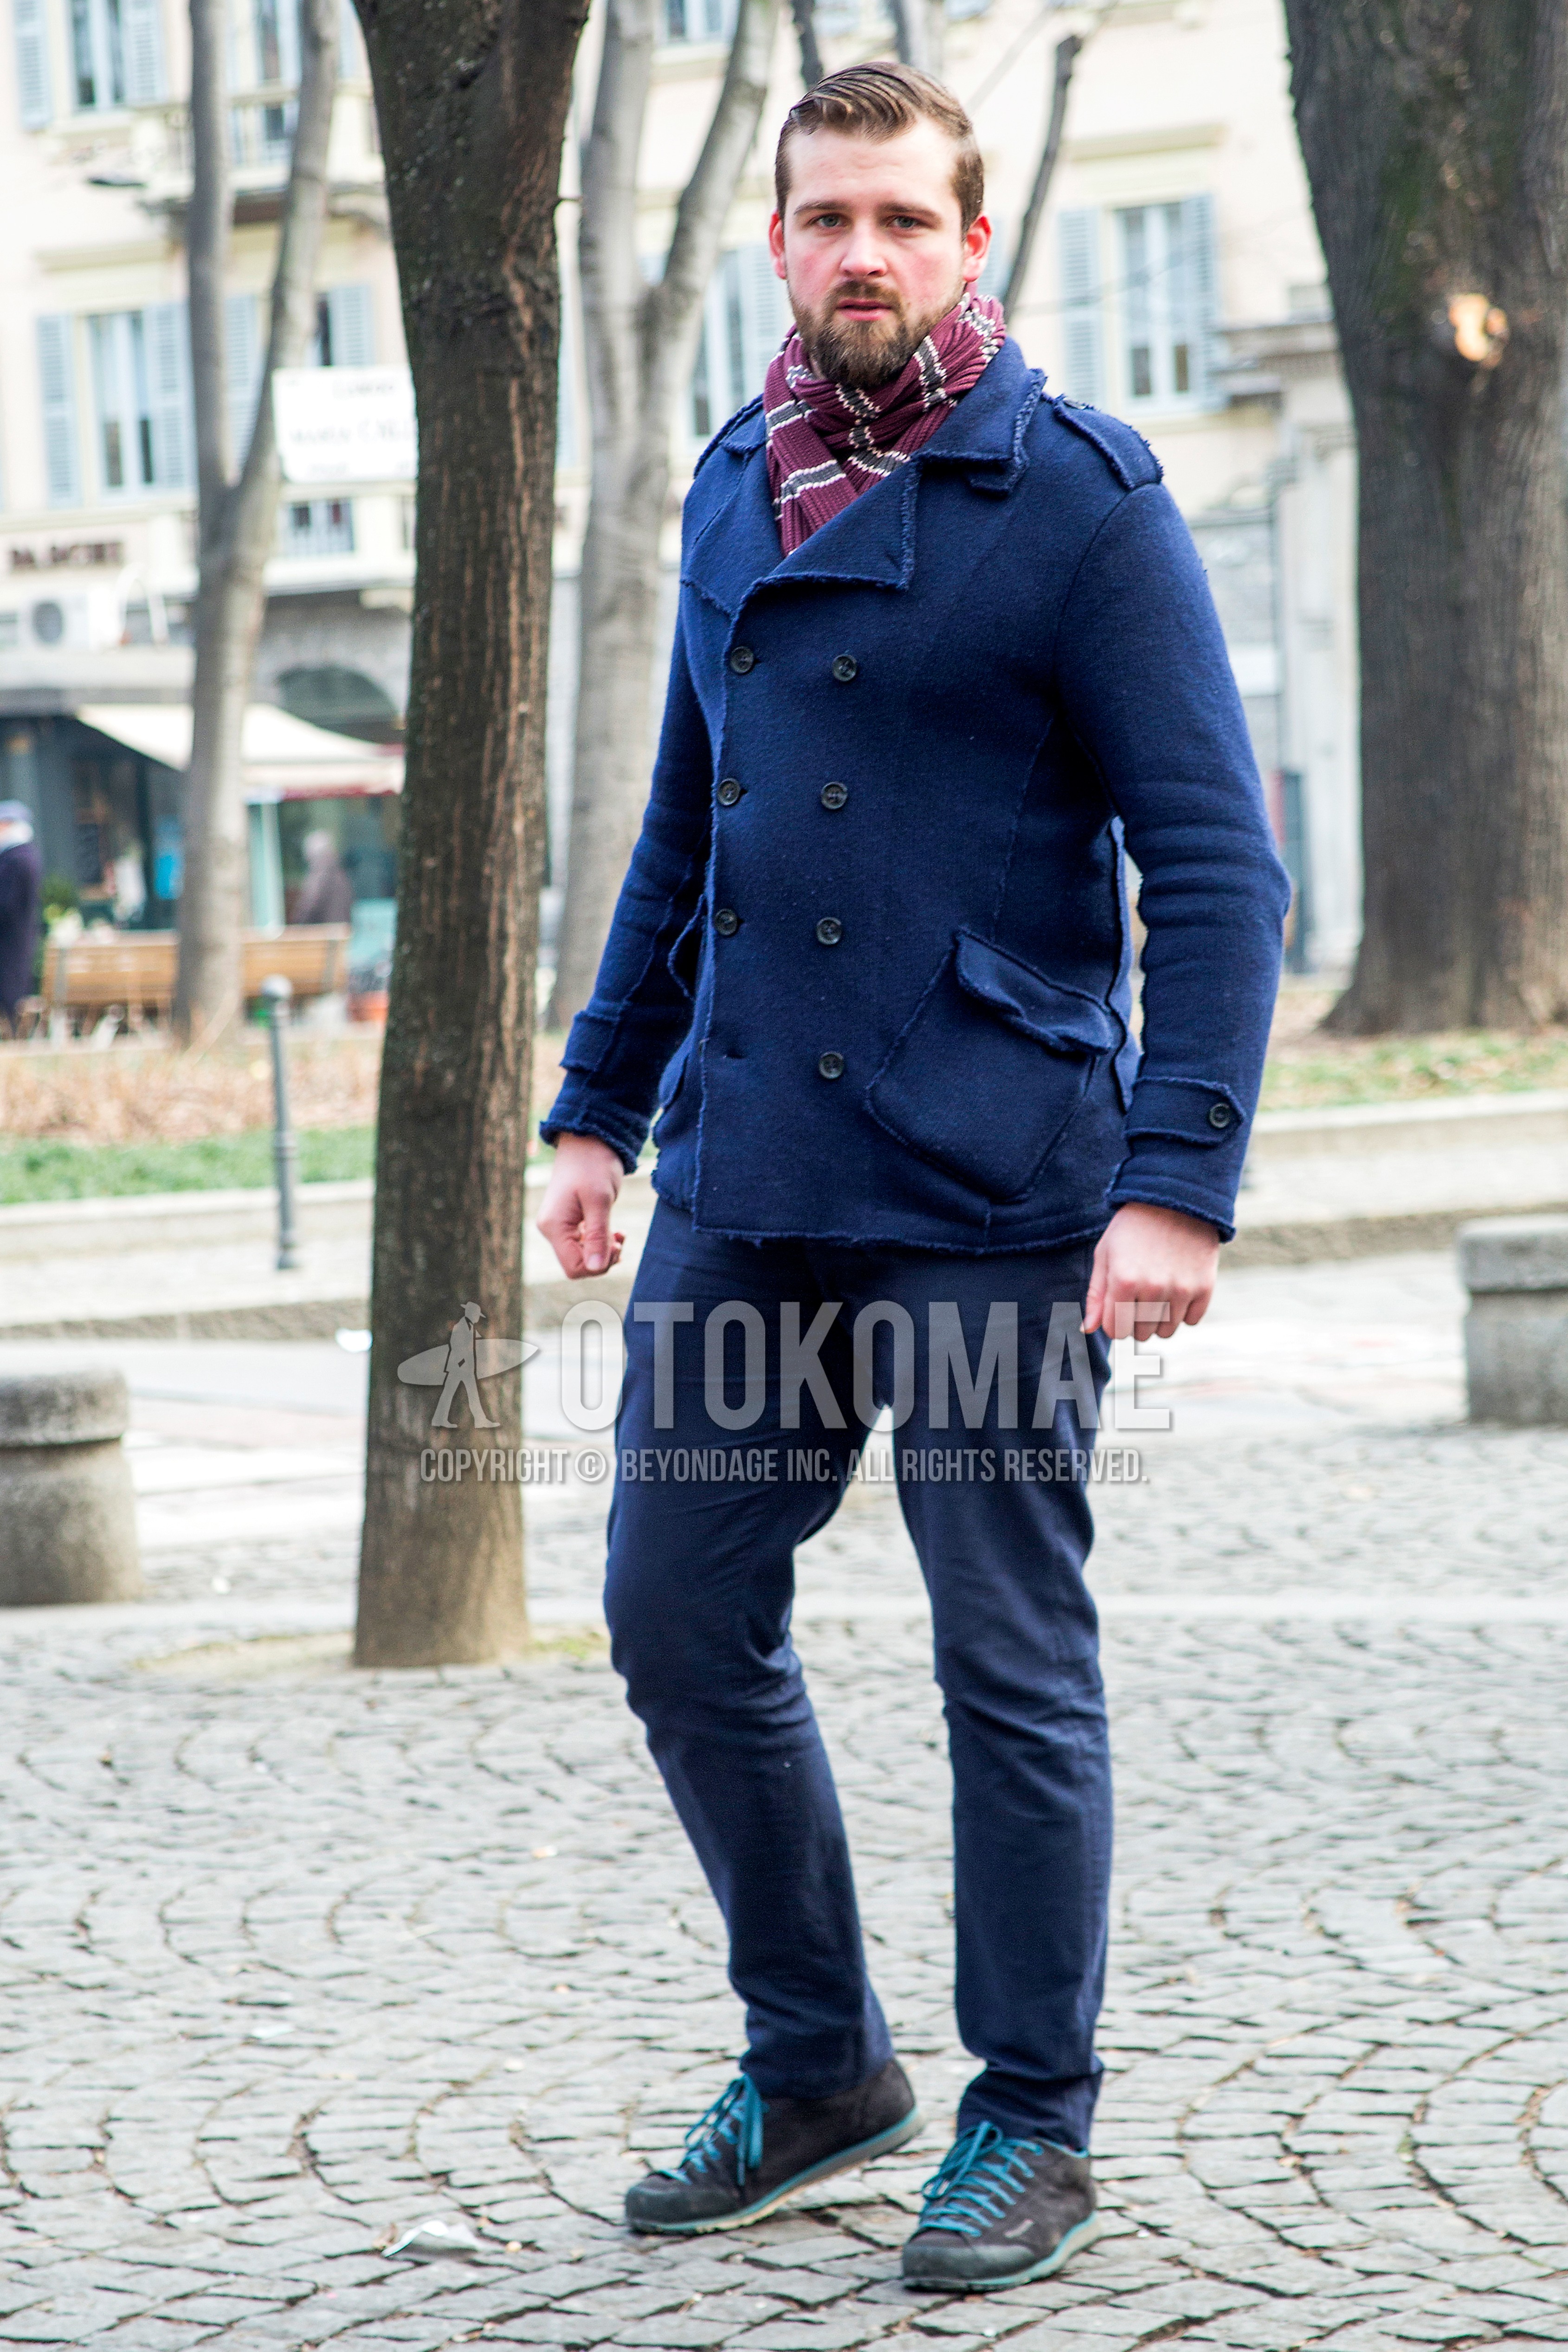 Men's winter outfit with red horizontal stripes scarf, navy plain p coat, navy plain chinos, gray low-cut sneakers.